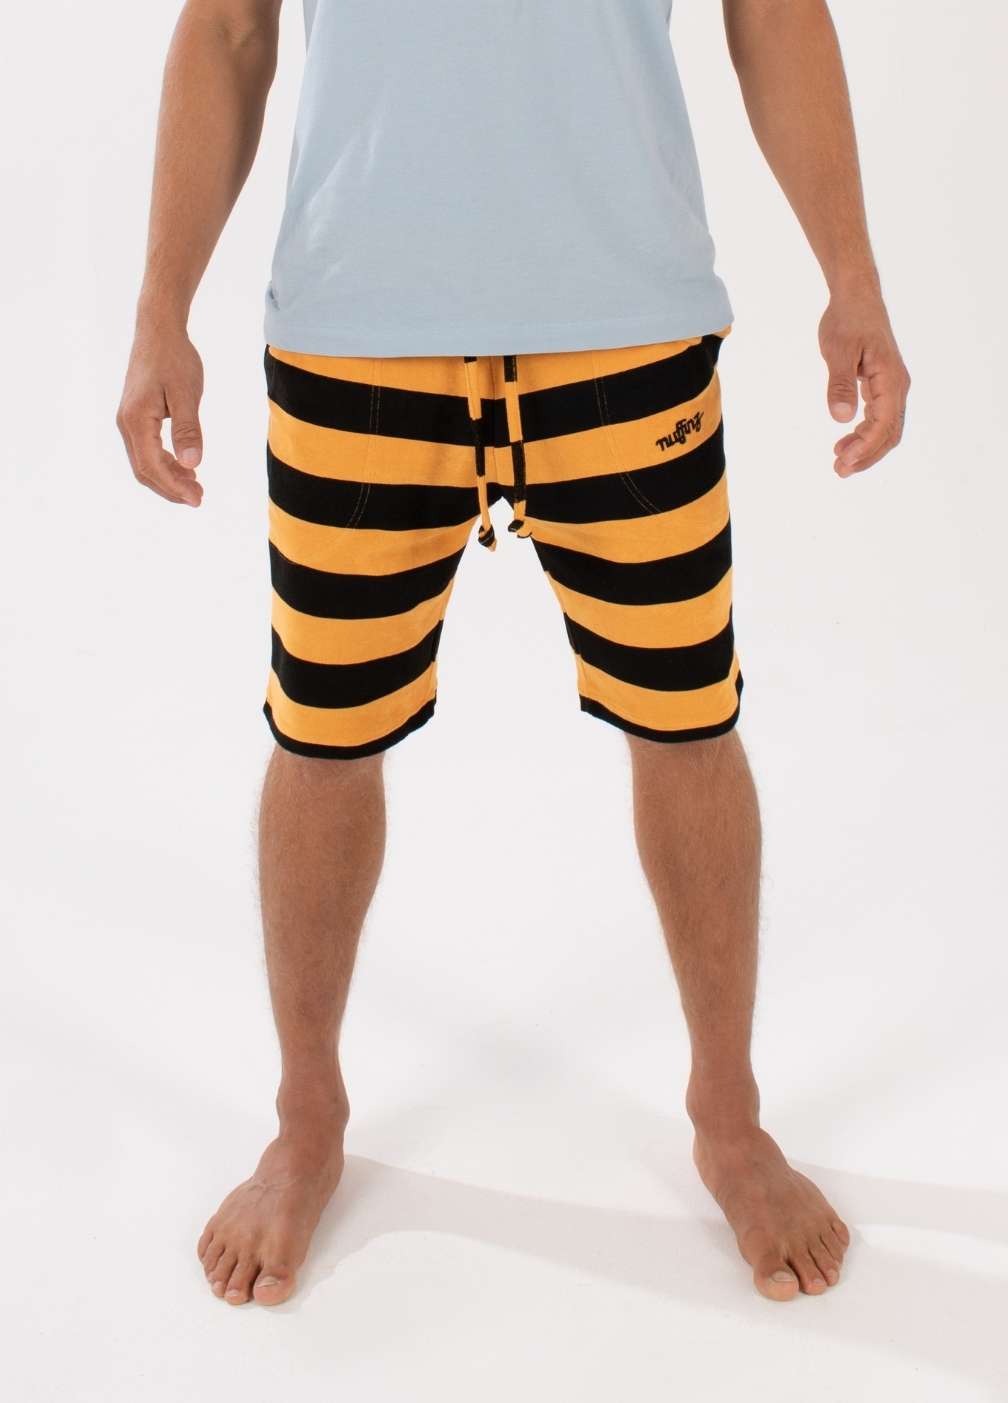 nuffinz striped shorts - GOLDEN NUGGET TOWEL SHORTS ST - 100% organic cotton - terry cloth - comfortable shorts for men - closeup front